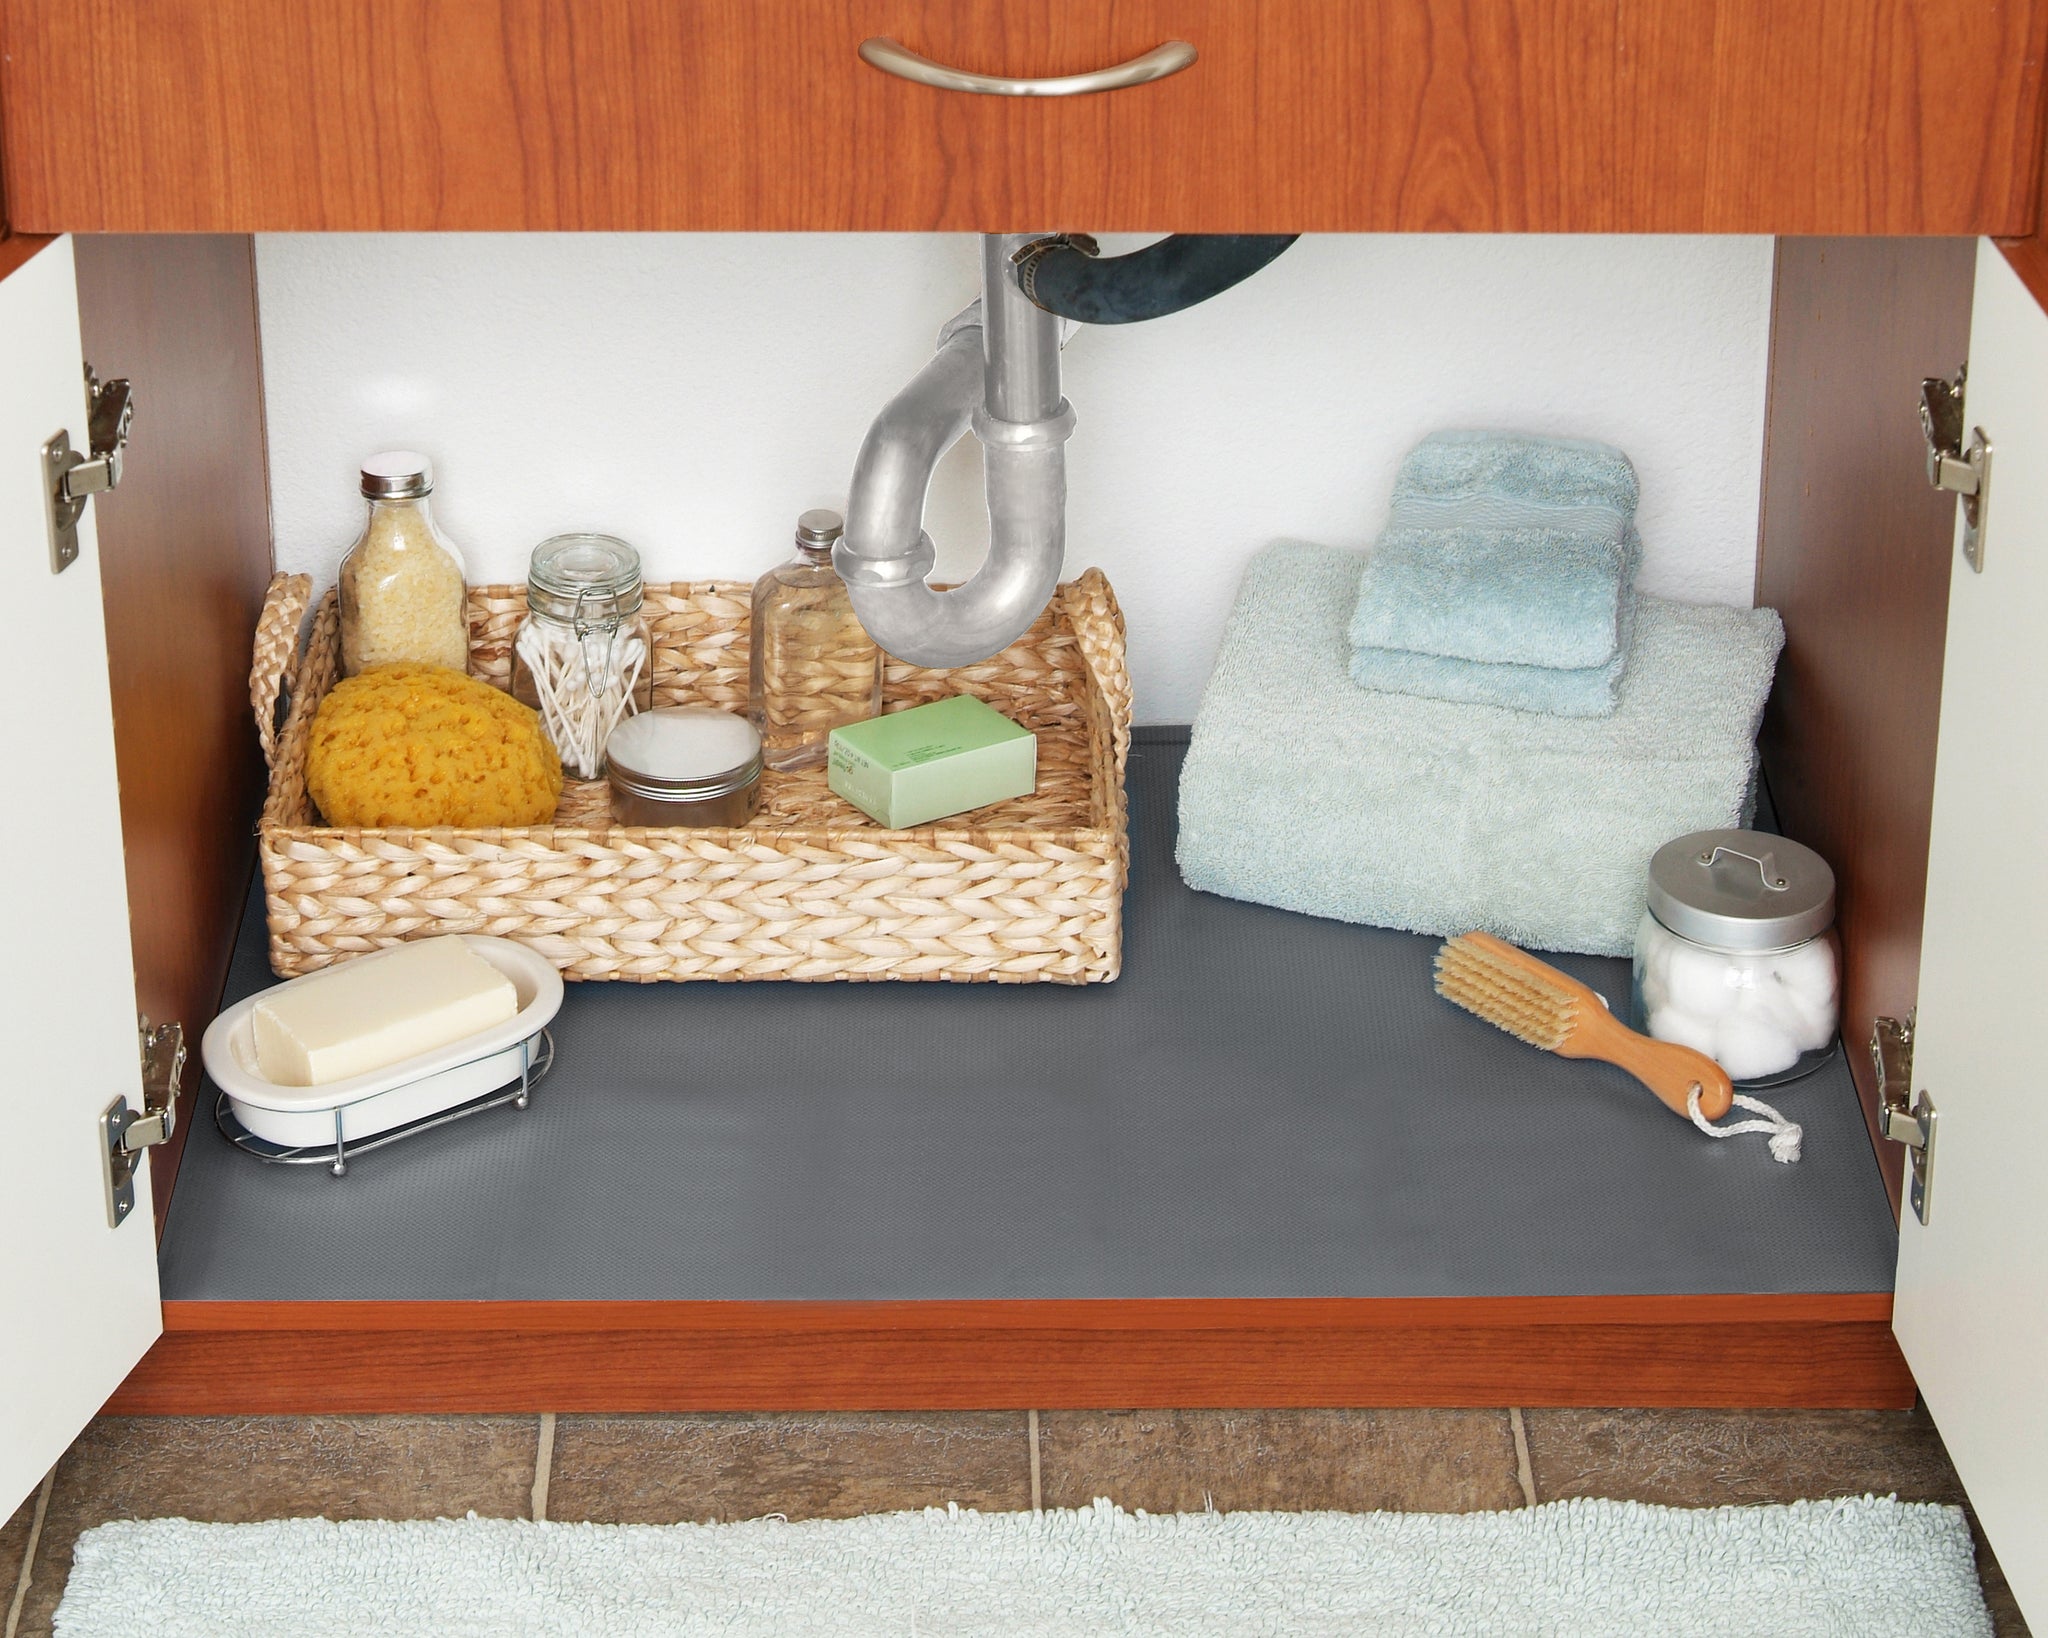 Con-Tact® Brand Under Sink Mat – Con-Tact Brand